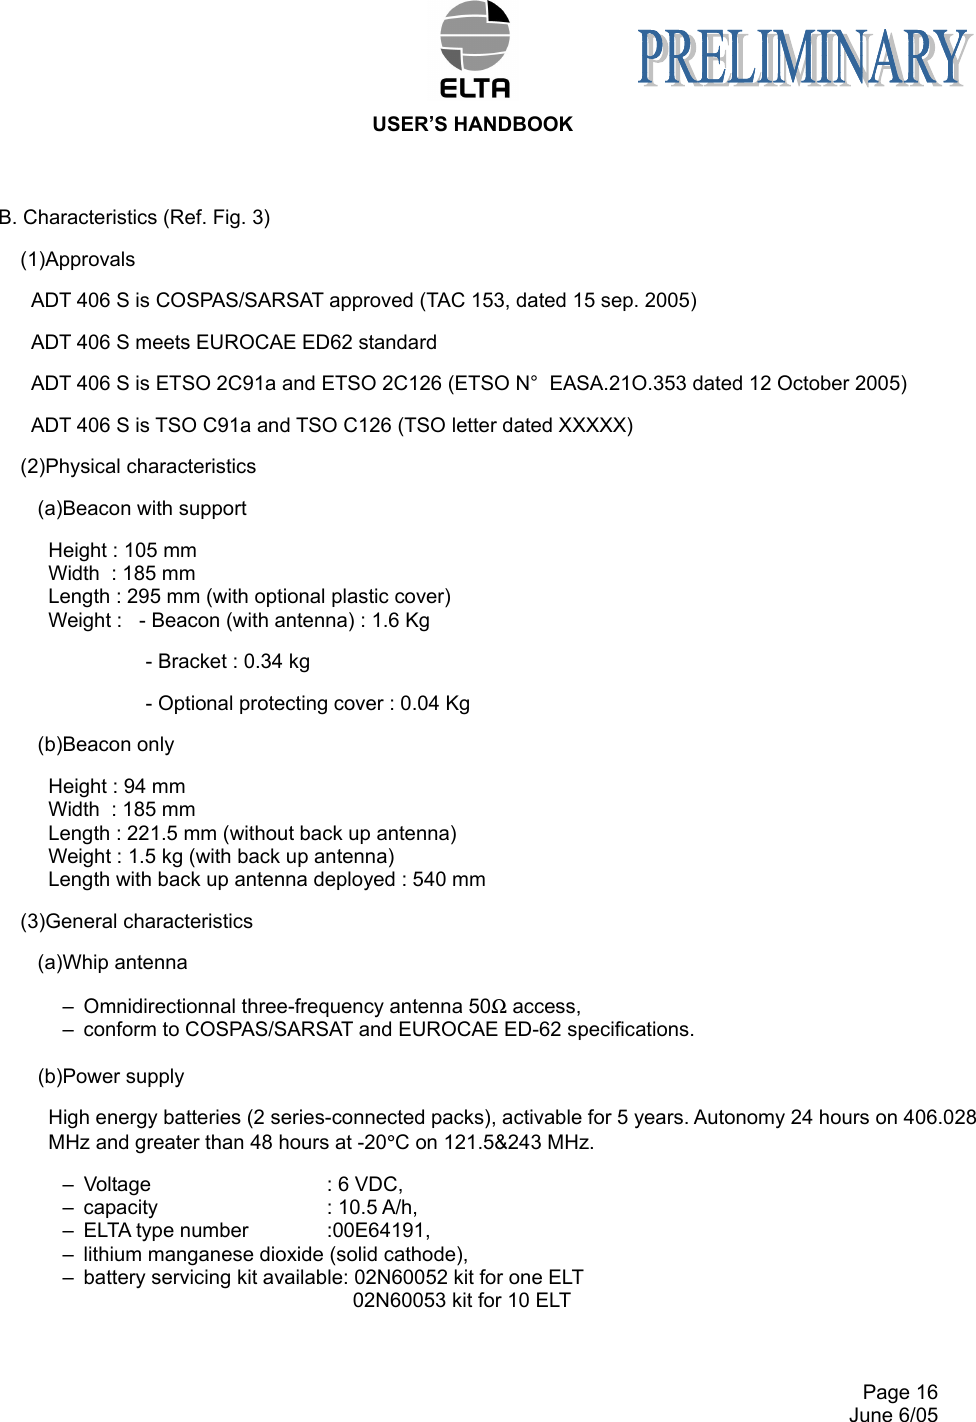  USER’S HANDBOOK     Page 16   June 6/05 B. Characteristics (Ref. Fig. 3) (1)Approvals ADT 406 S is COSPAS/SARSAT approved (TAC 153, dated 15 sep. 2005) ADT 406 S meets EUROCAE ED62 standard ADT 406 S is ETSO 2C91a and ETSO 2C126 (ETSO N°  EASA.21O.353 dated 12 October 2005) ADT 406 S is TSO C91a and TSO C126 (TSO letter dated XXXXX) (2)Physical characteristics (a)Beacon with support Height : 105 mm Width  : 185 mm Length : 295 mm (with optional plastic cover) Weight :   - Beacon (with antenna) : 1.6 Kg - Bracket : 0.34 kg  - Optional protecting cover : 0.04 Kg (b)Beacon only Height : 94 mm Width  : 185 mm Length : 221.5 mm (without back up antenna) Weight : 1.5 kg (with back up antenna) Length with back up antenna deployed : 540 mm (3)General characteristics (a)Whip antenna –  Omnidirectionnal three-frequency antenna 50Ω access, –  conform to COSPAS/SARSAT and EUROCAE ED-62 specifications.  (b)Power supply High energy batteries (2 series-connected packs), activable for 5 years. Autonomy 24 hours on 406.028 MHz and greater than 48 hours at -20°C on 121.5&amp;243 MHz. –  Voltage      : 6 VDC, –  capacity      : 10.5 A/h, –  ELTA type number   :00E64191, –  lithium manganese dioxide (solid cathode), –  battery servicing kit available: 02N60052 kit for one ELT  02N60053 kit for 10 ELT 